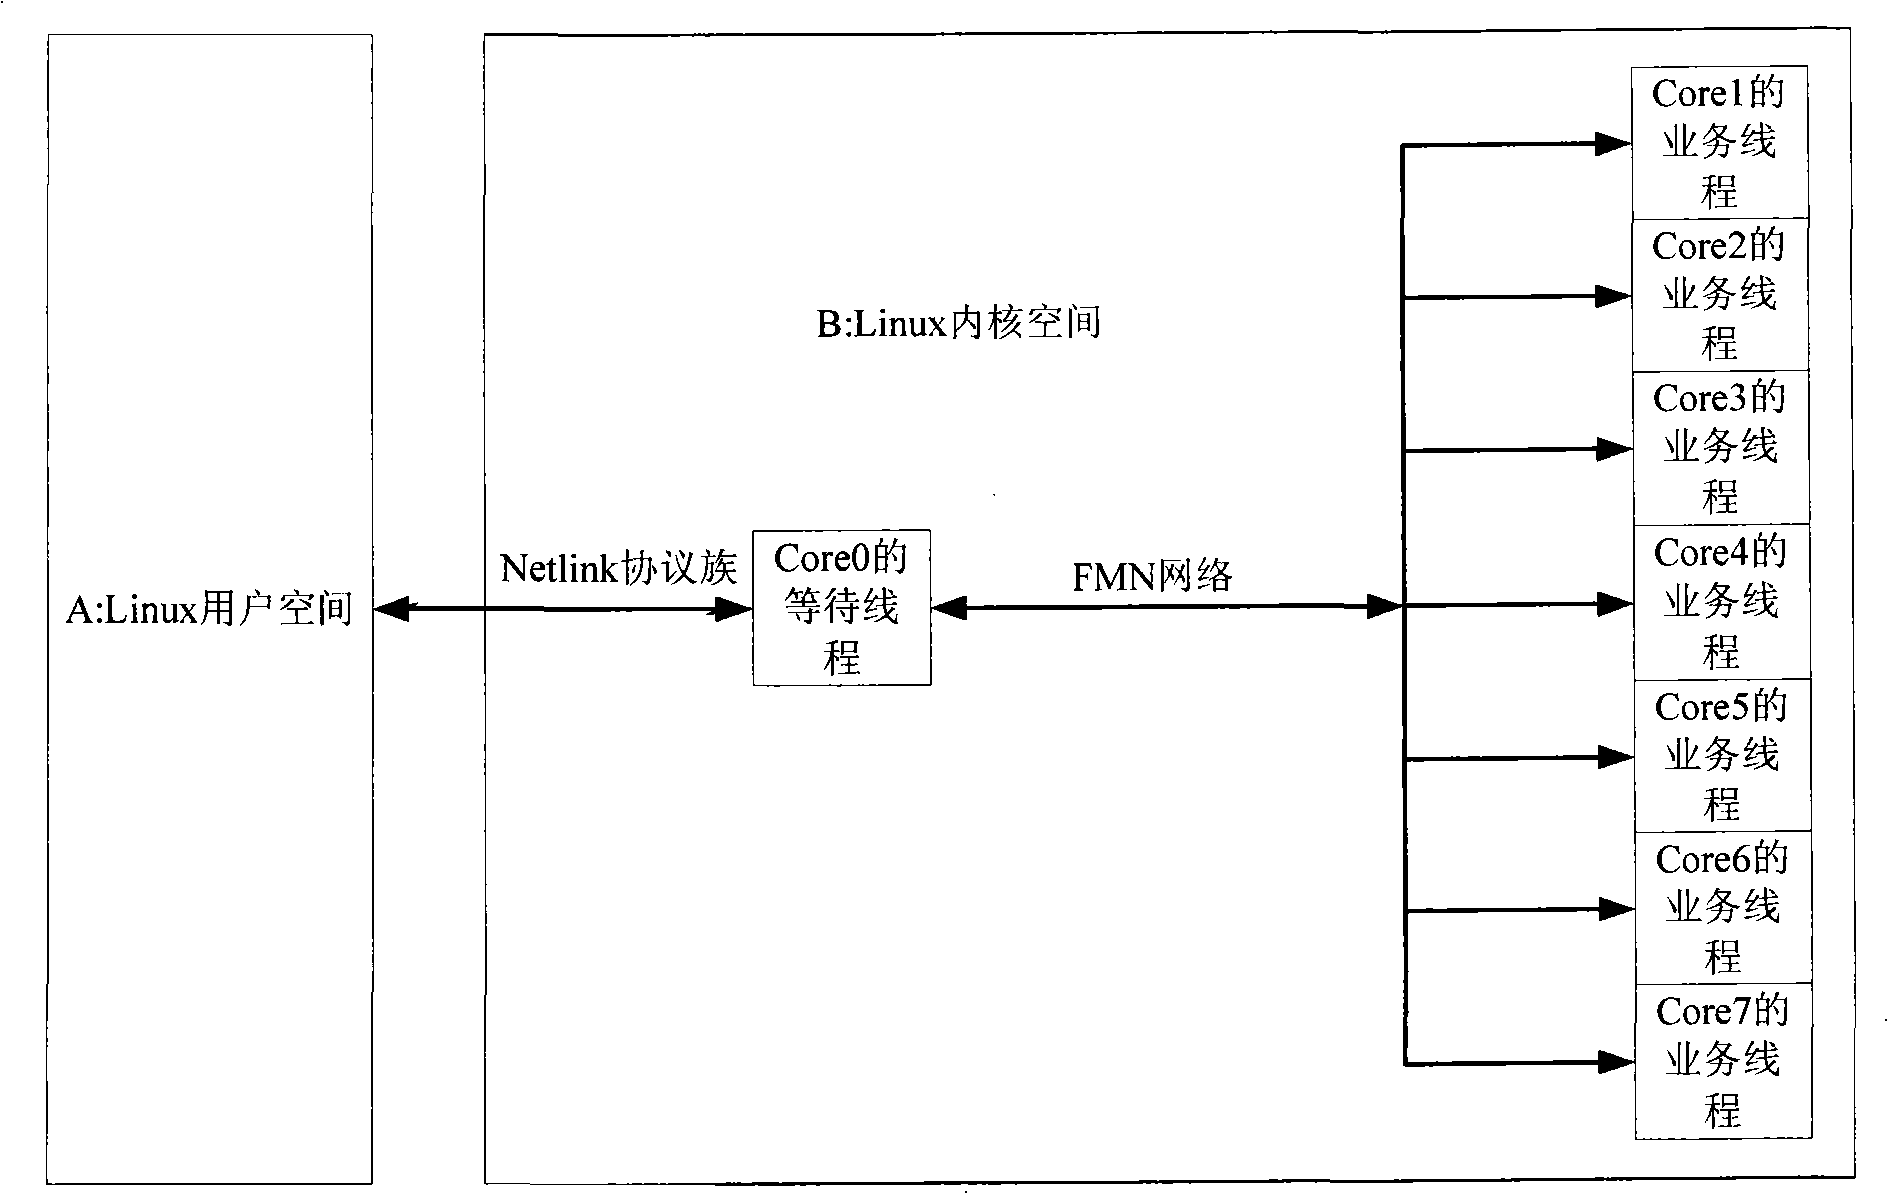 Method for user and multi-inner core to perform communication in Linux system